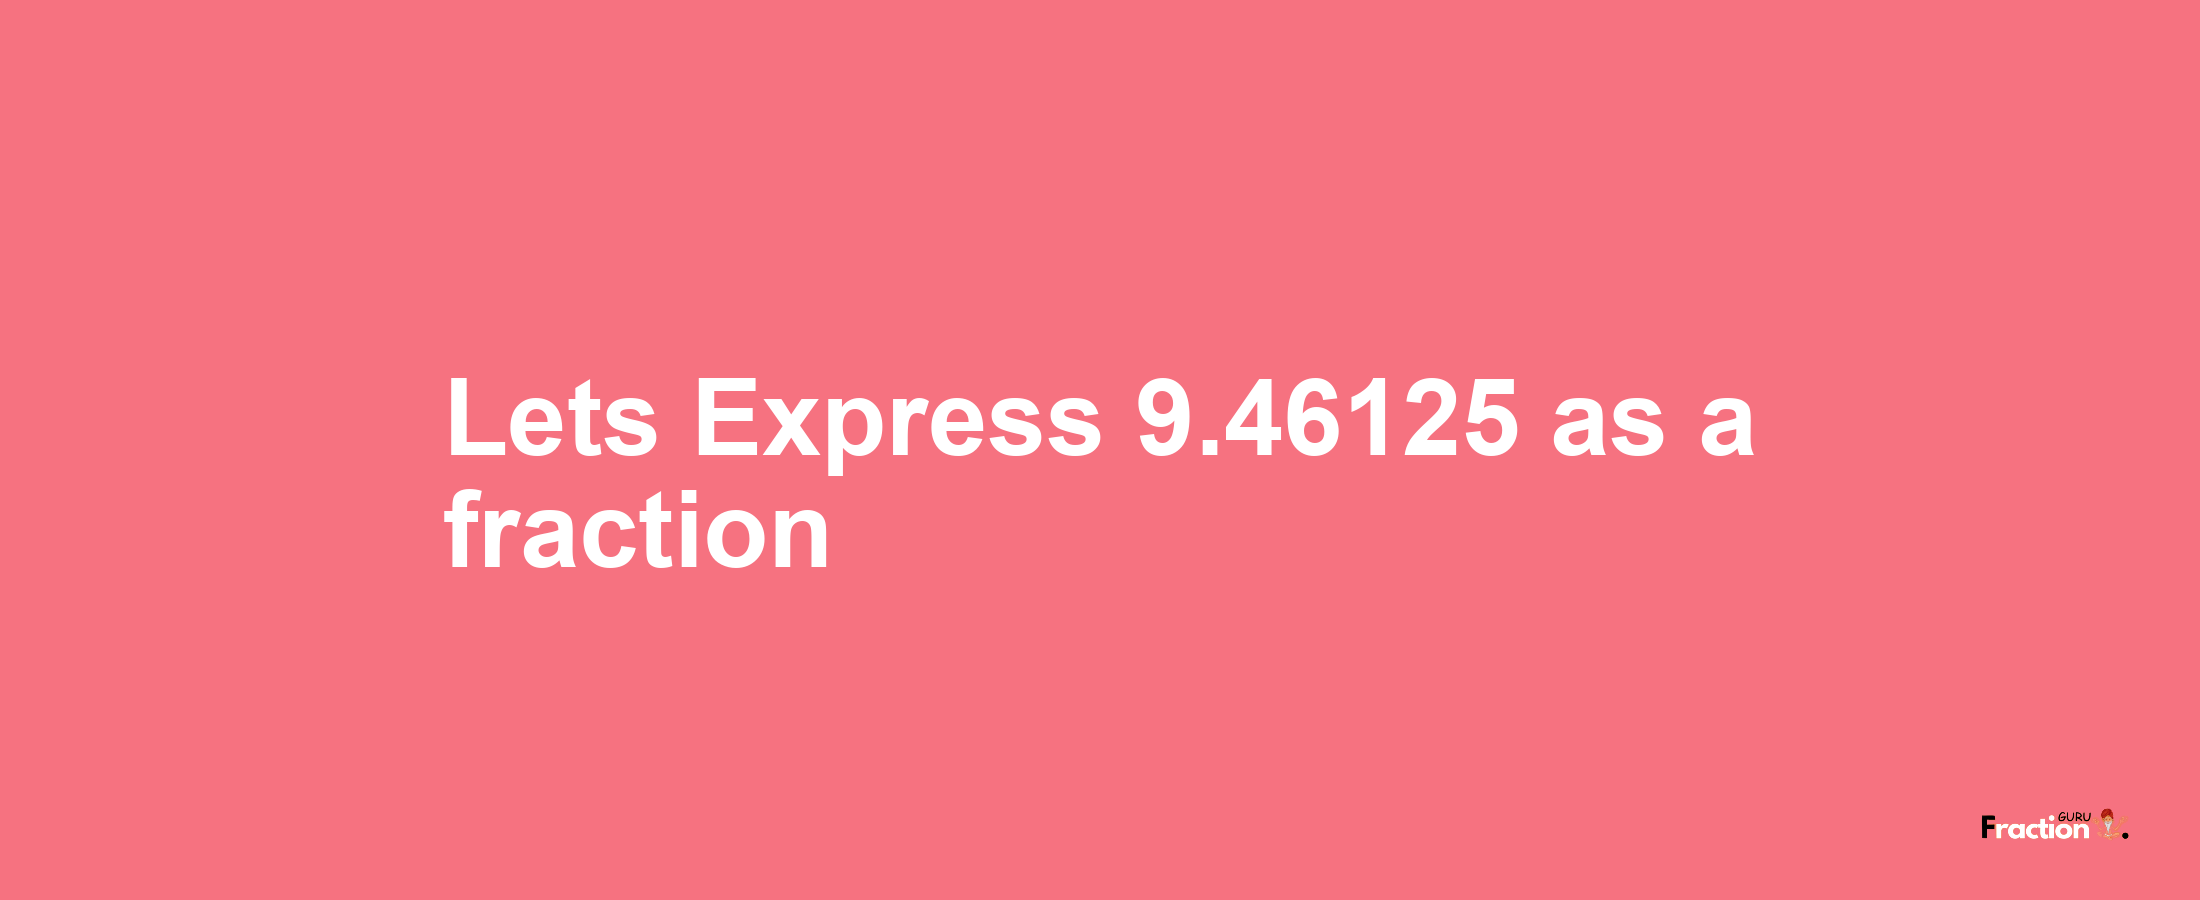 Lets Express 9.46125 as afraction